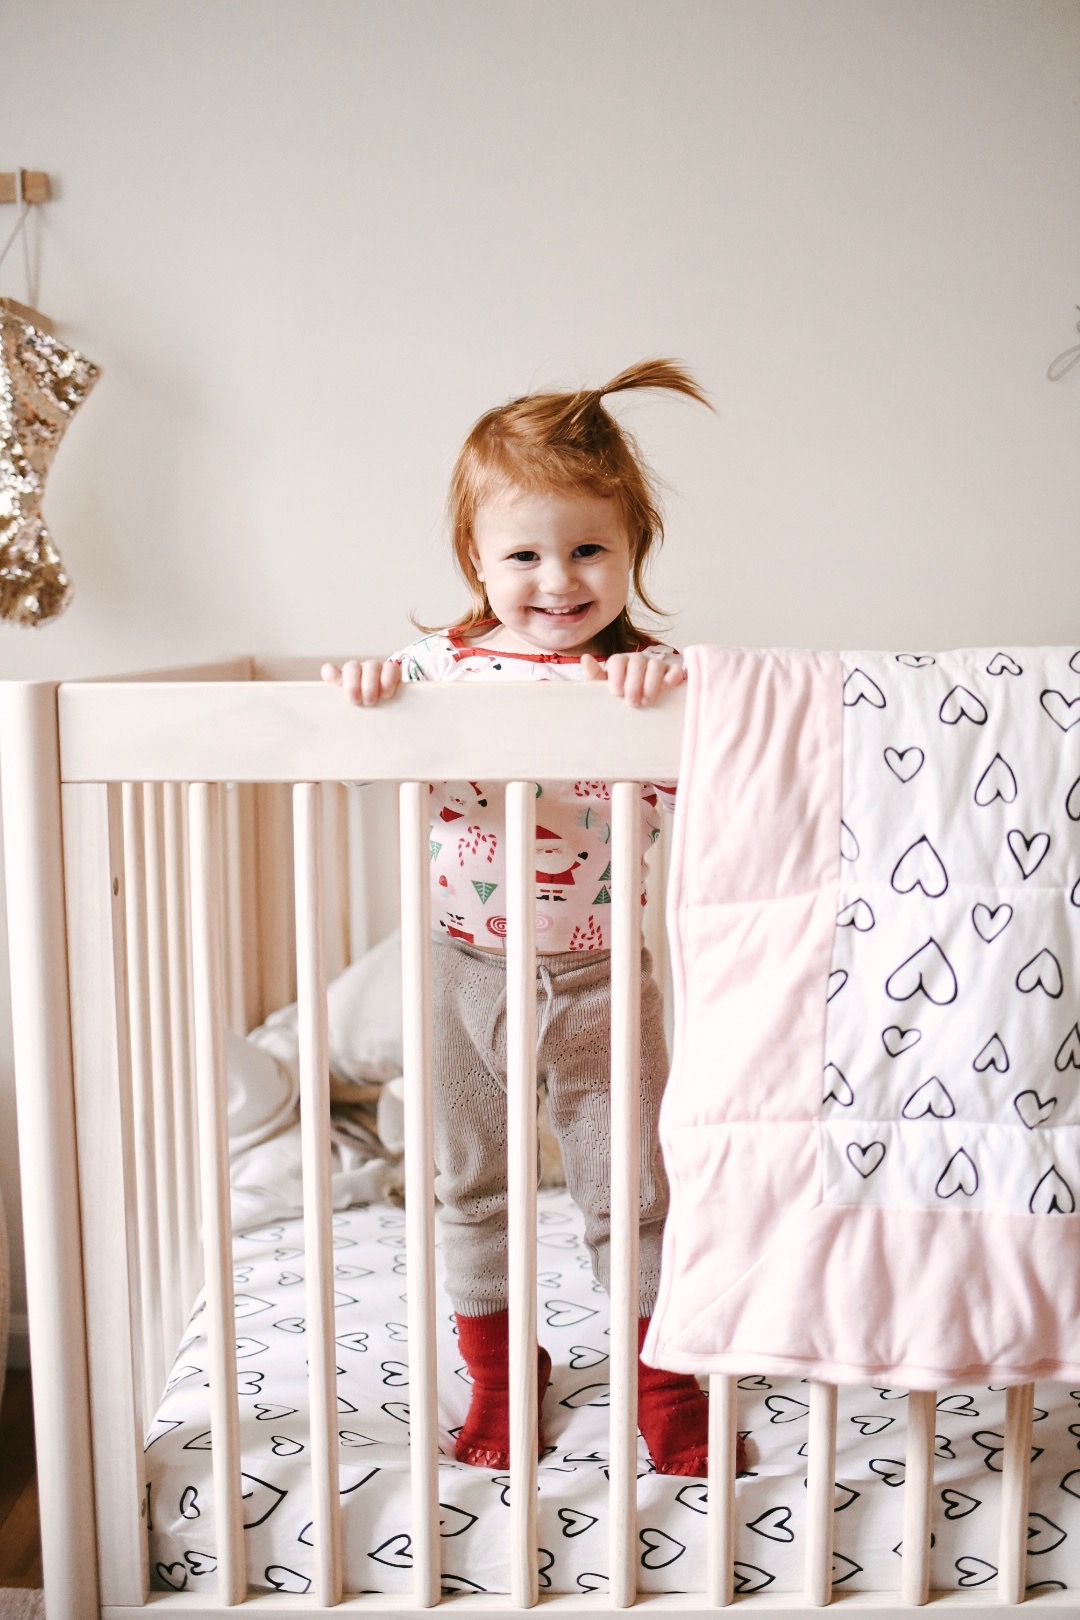 Tips For The 2 Year Old Nap Regression & Flora's Bedding - The Mama Notes